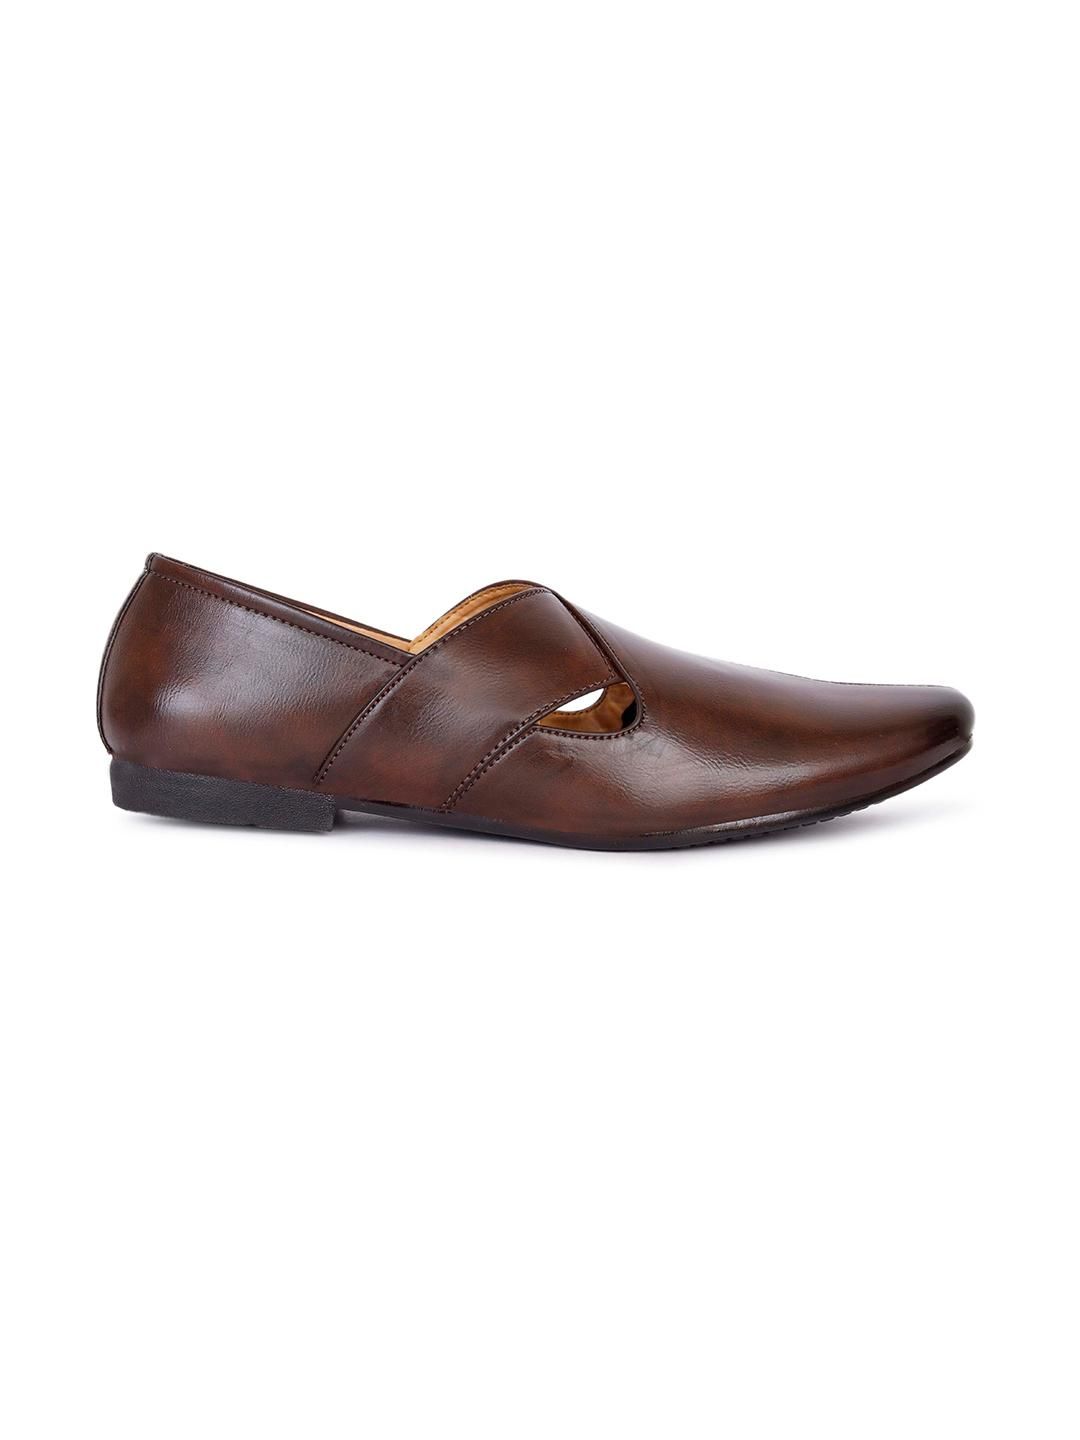 Rvy Men Slip-on Synthetic Leather Loafer